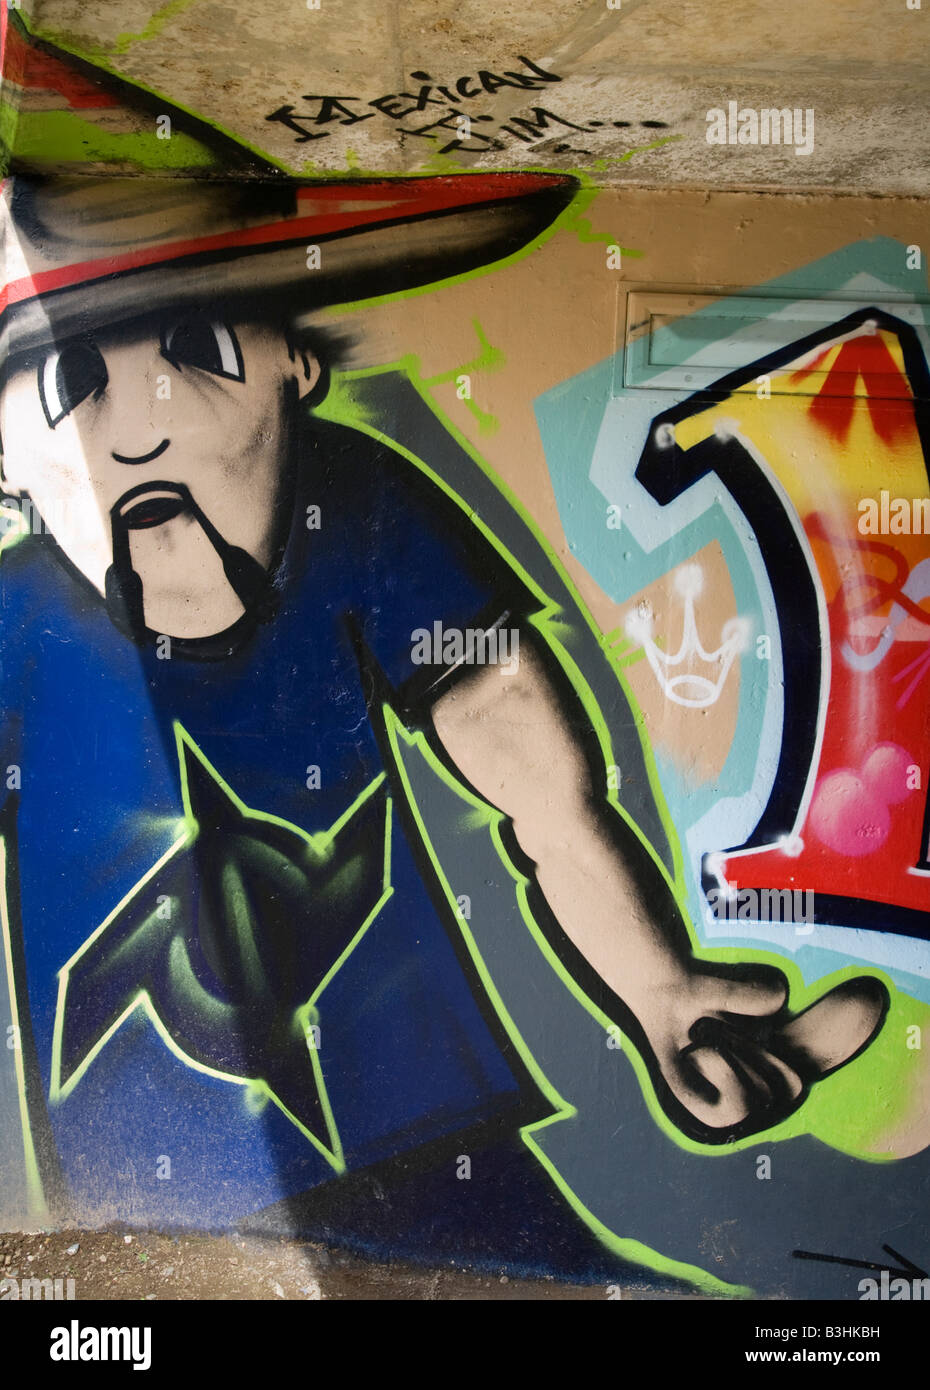 A graffiti image of a Mexican making a rude gesture painted on a wall. Stock Photo